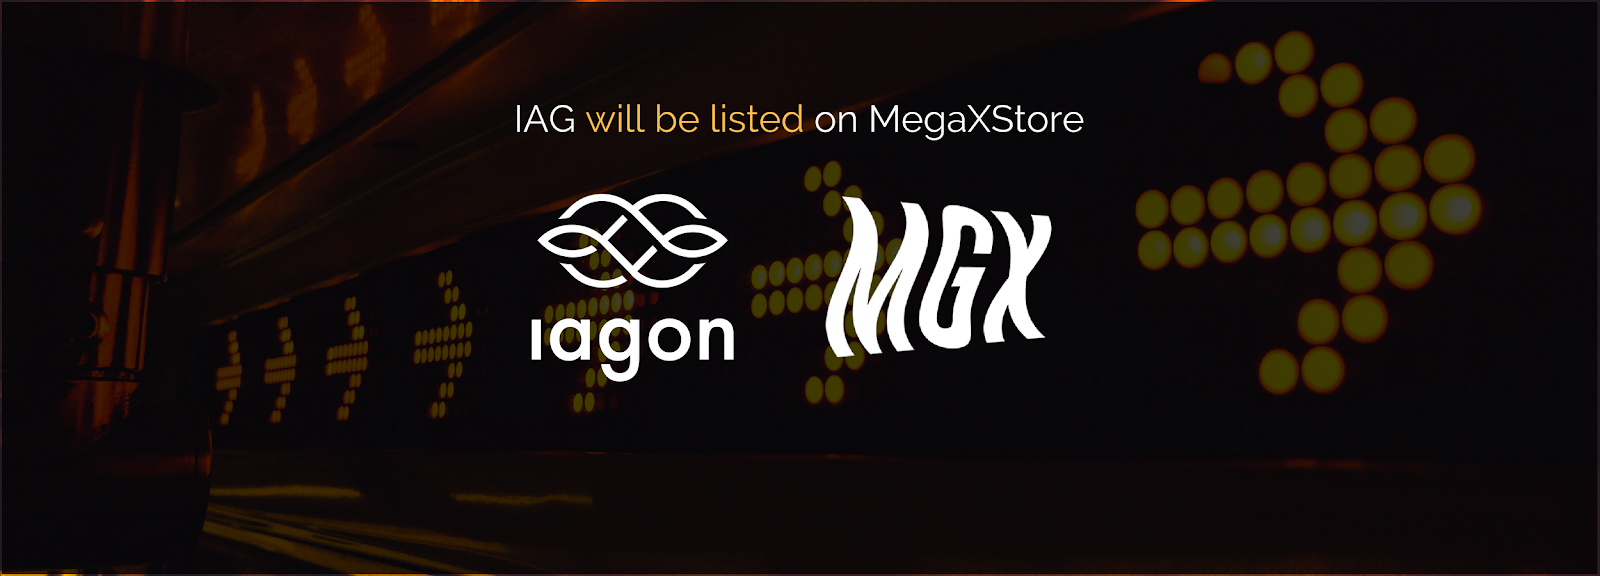 IAGON is Now Listed on the MegaXStore